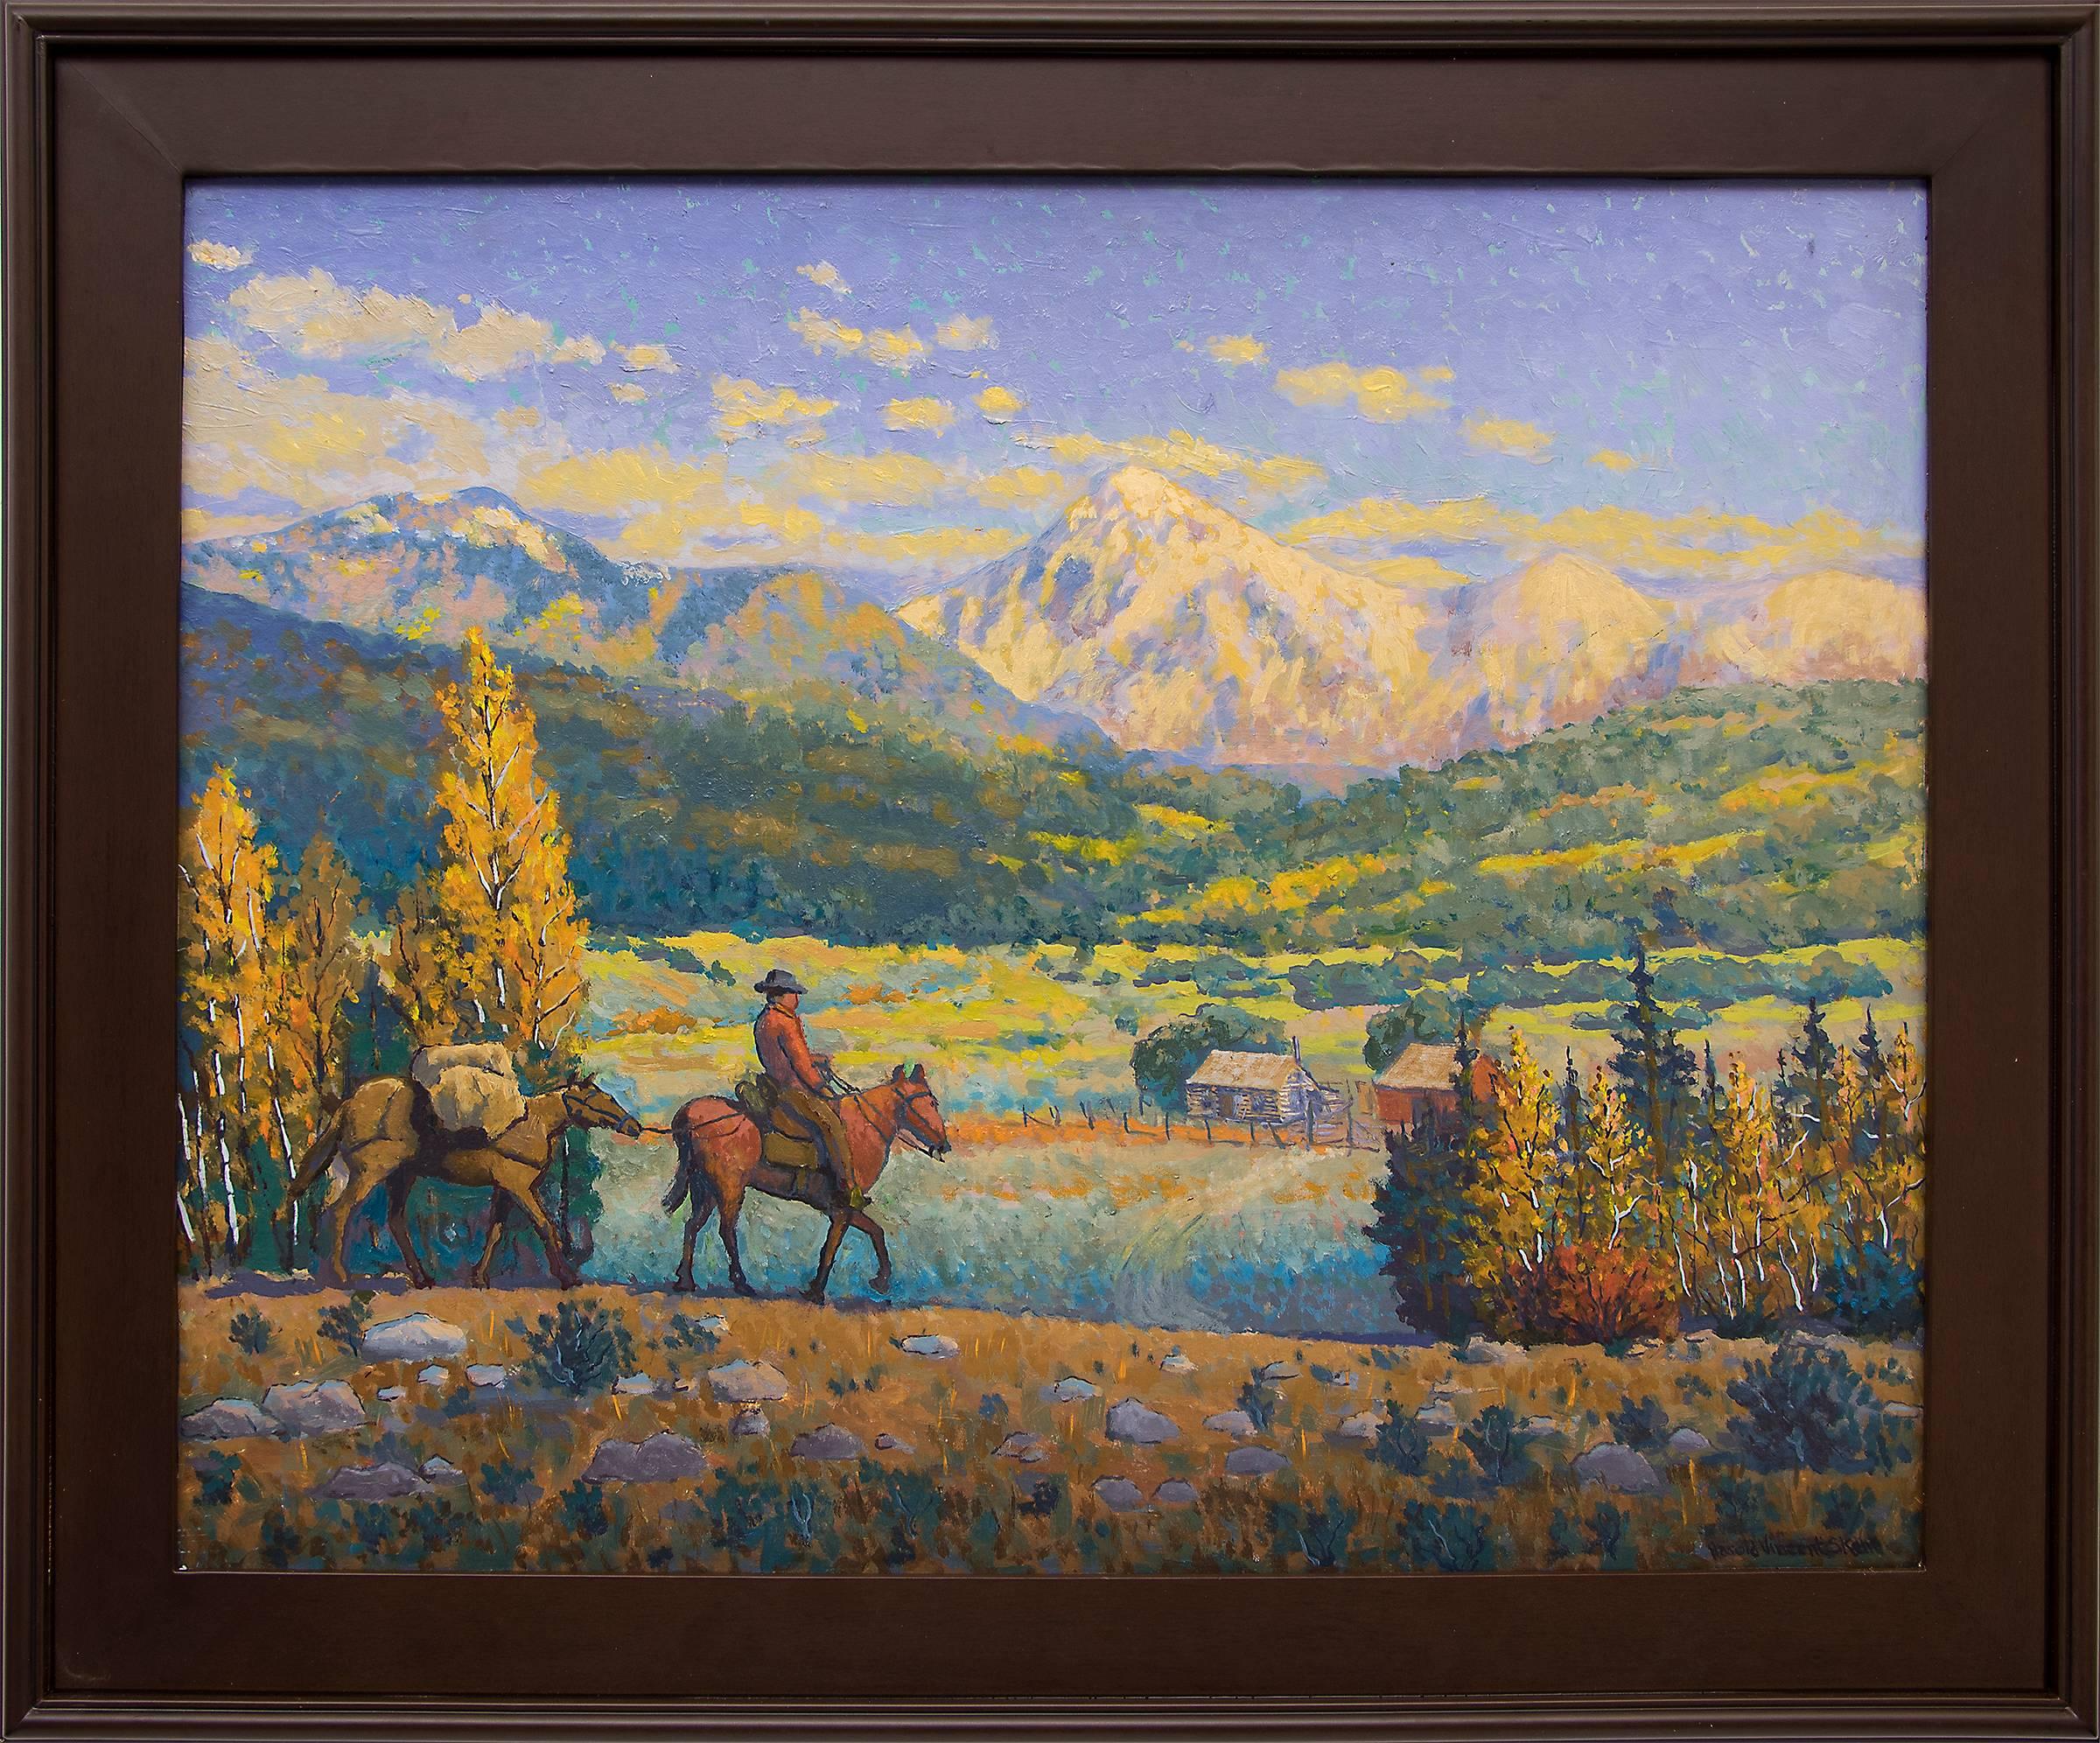 Harold Vincent Skene Landscape Painting - The Return (Horse and Rider in a Western Mountain Landscape, Autumn)